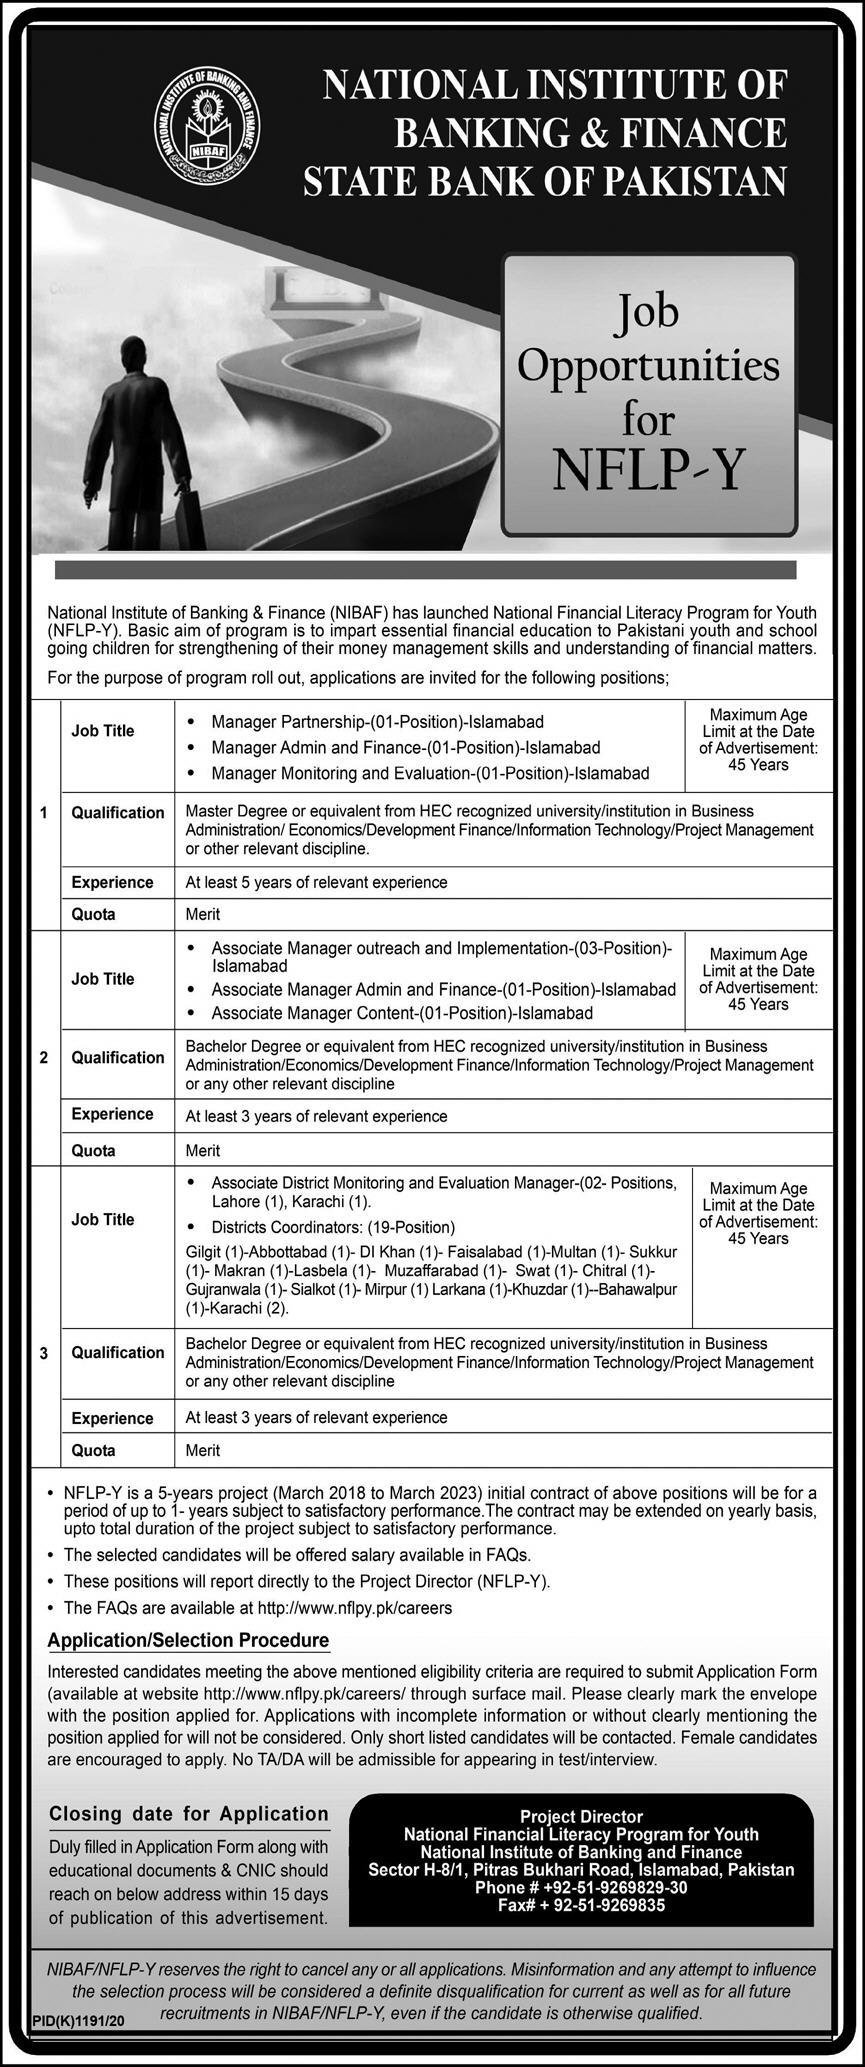 pplication Procedure: Interested candidates meeting the eligibility criteria are required to submit an Application Form through the surface mail. Duly filled in Application Form along with educational documents & CNIC should reach to National Institute of Banking & Finance, Sector H-8/1, Pitras Bukhari Road, Islamabad. The final date for the application is November 16, 2020.